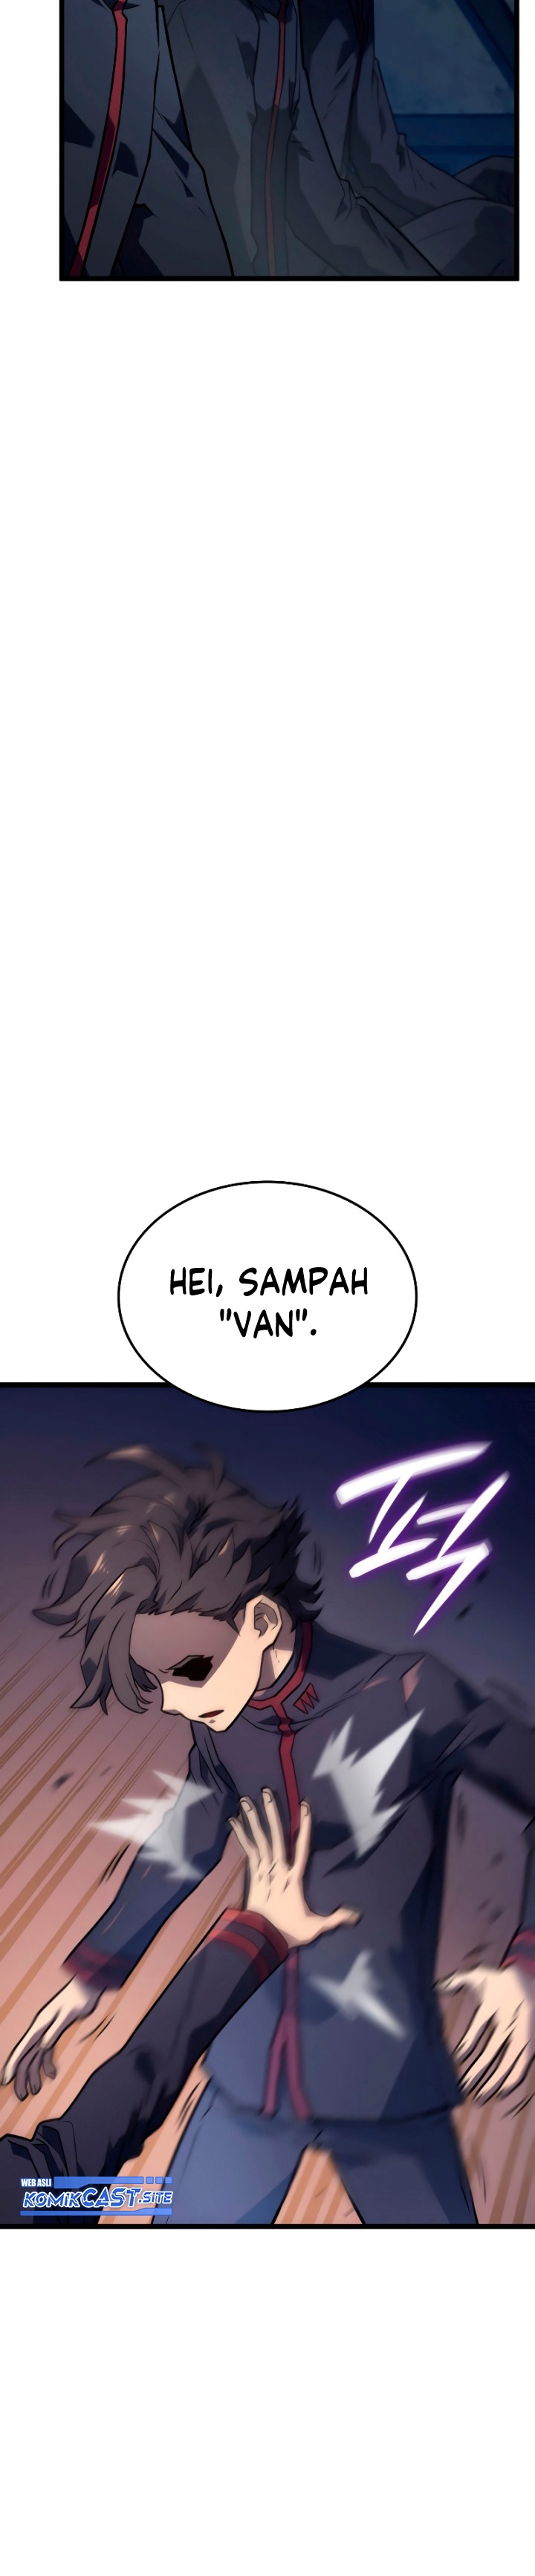 Revenge Of The Iron-Blooded Sword Hound Chapter 02